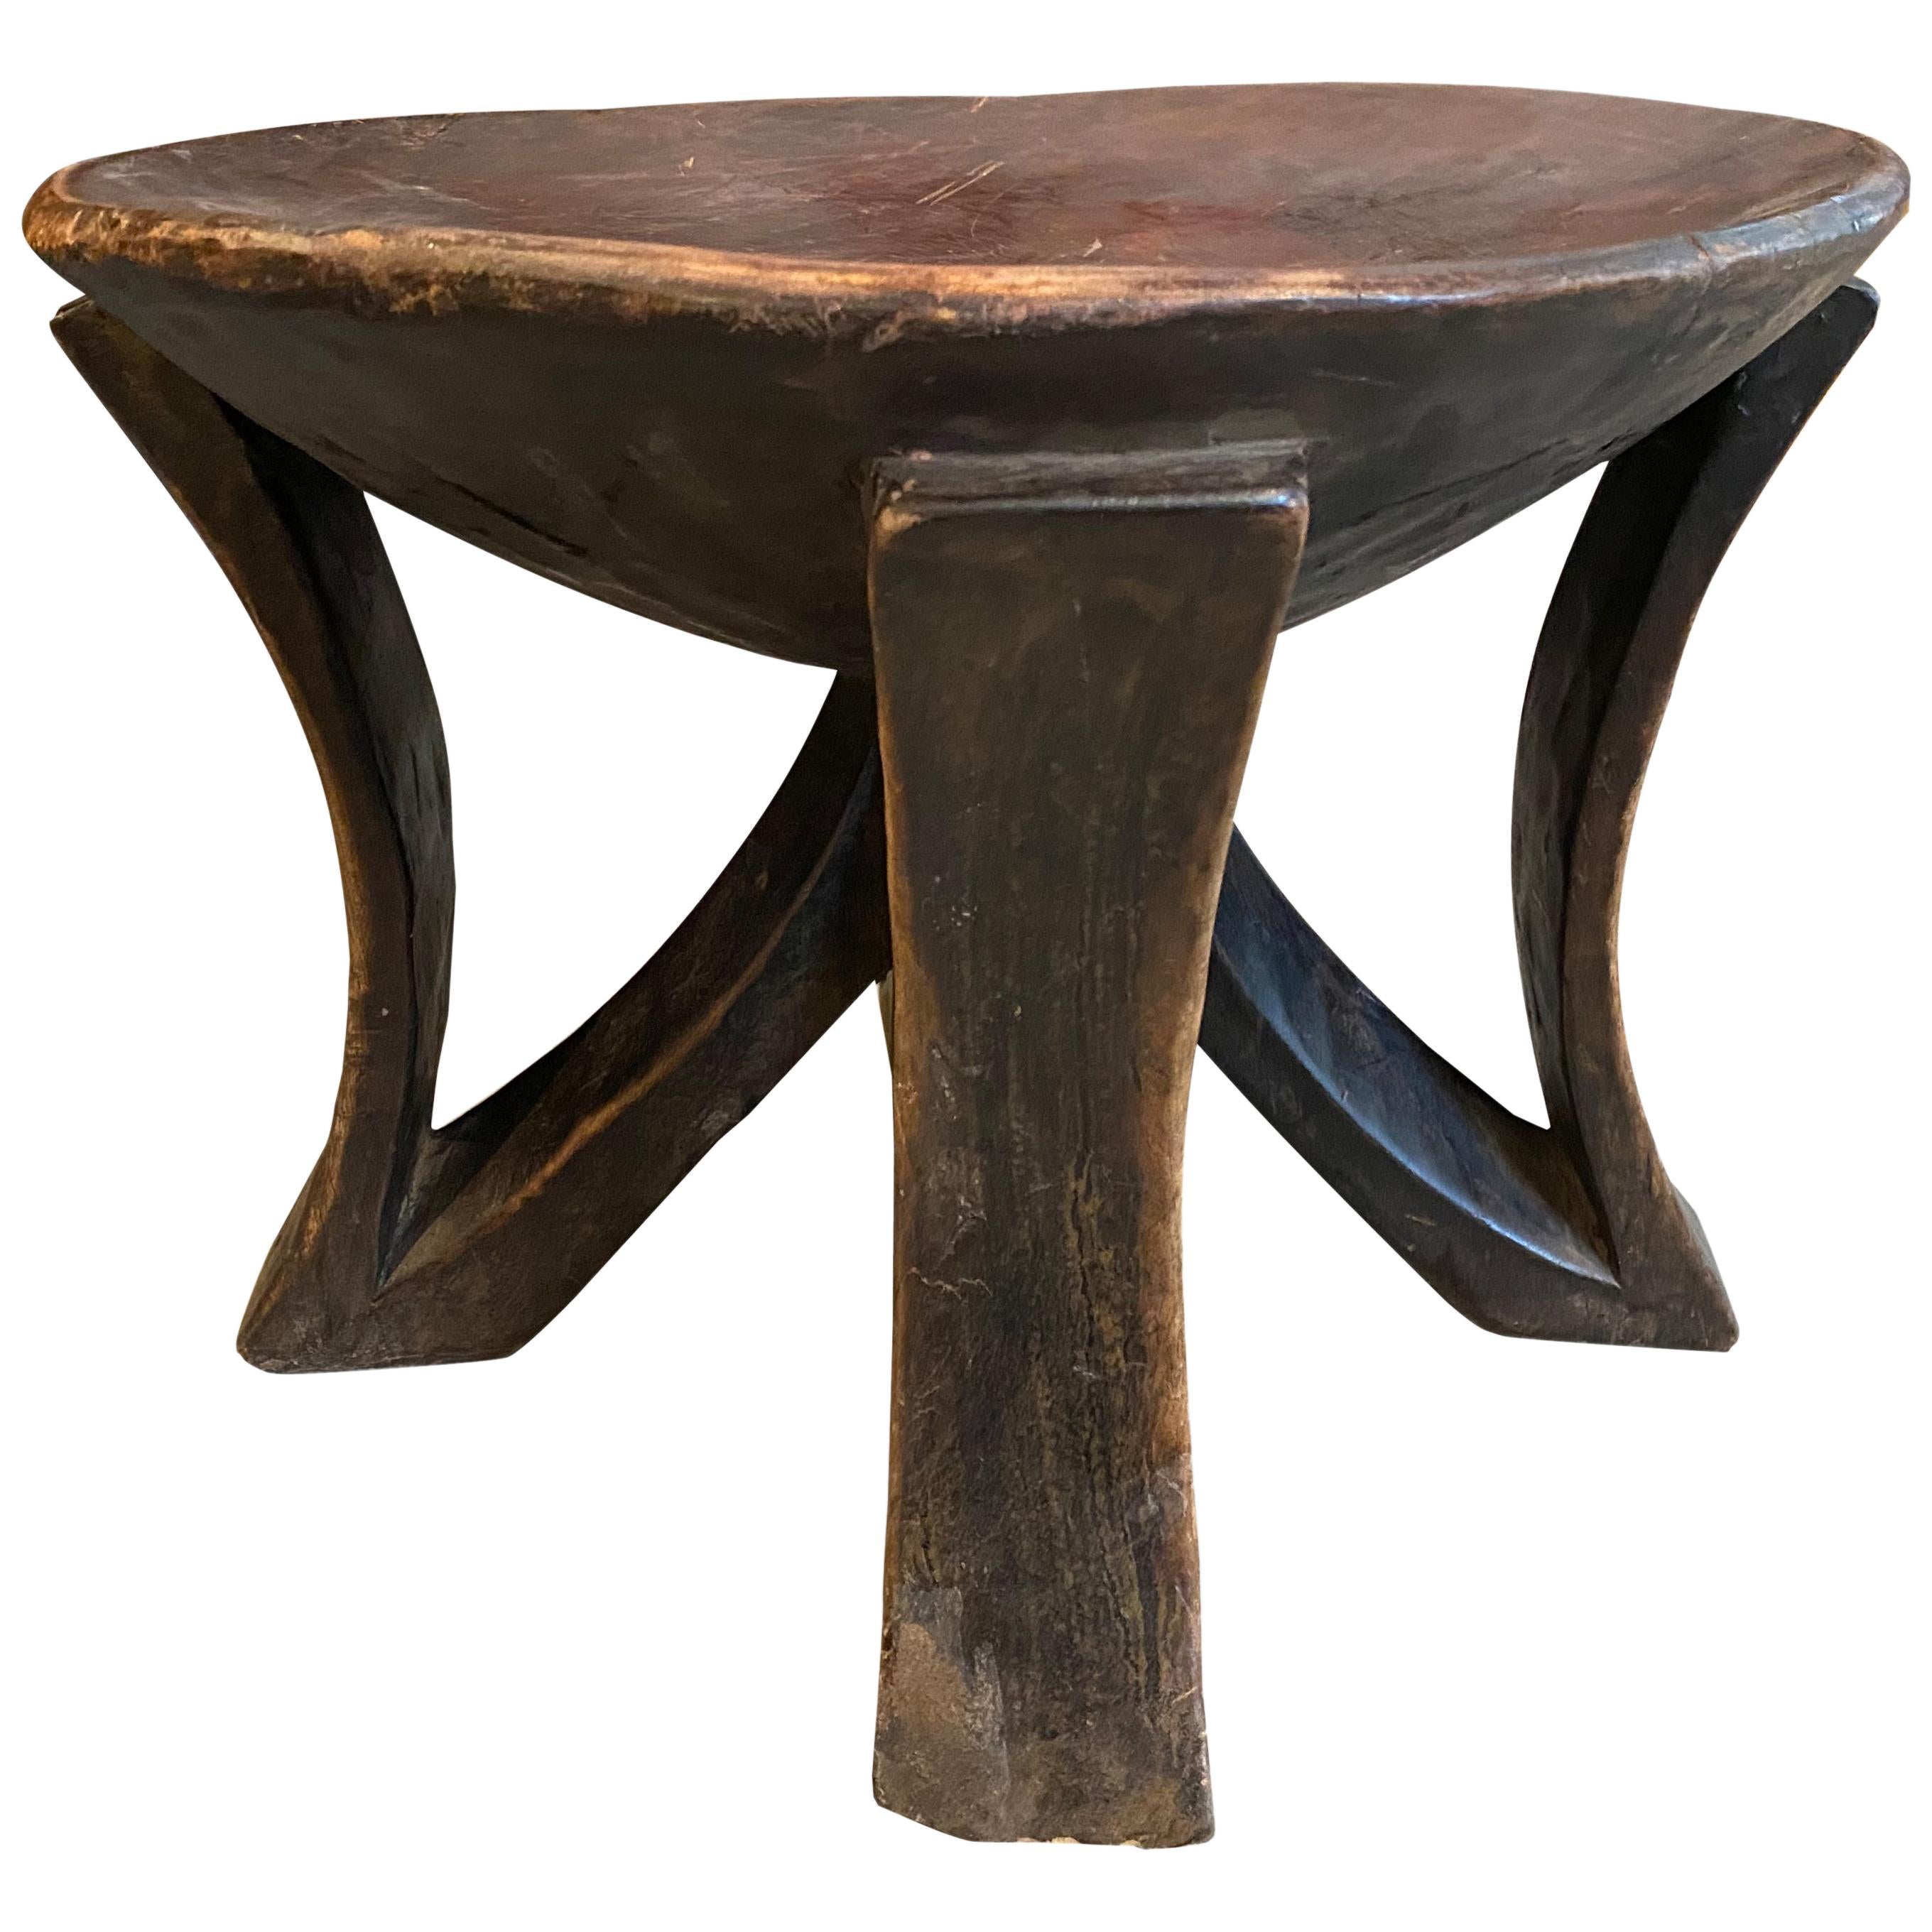 Andrianna Shamaris Antique African Mahogany Wood Sculptural Side Table or Bowl